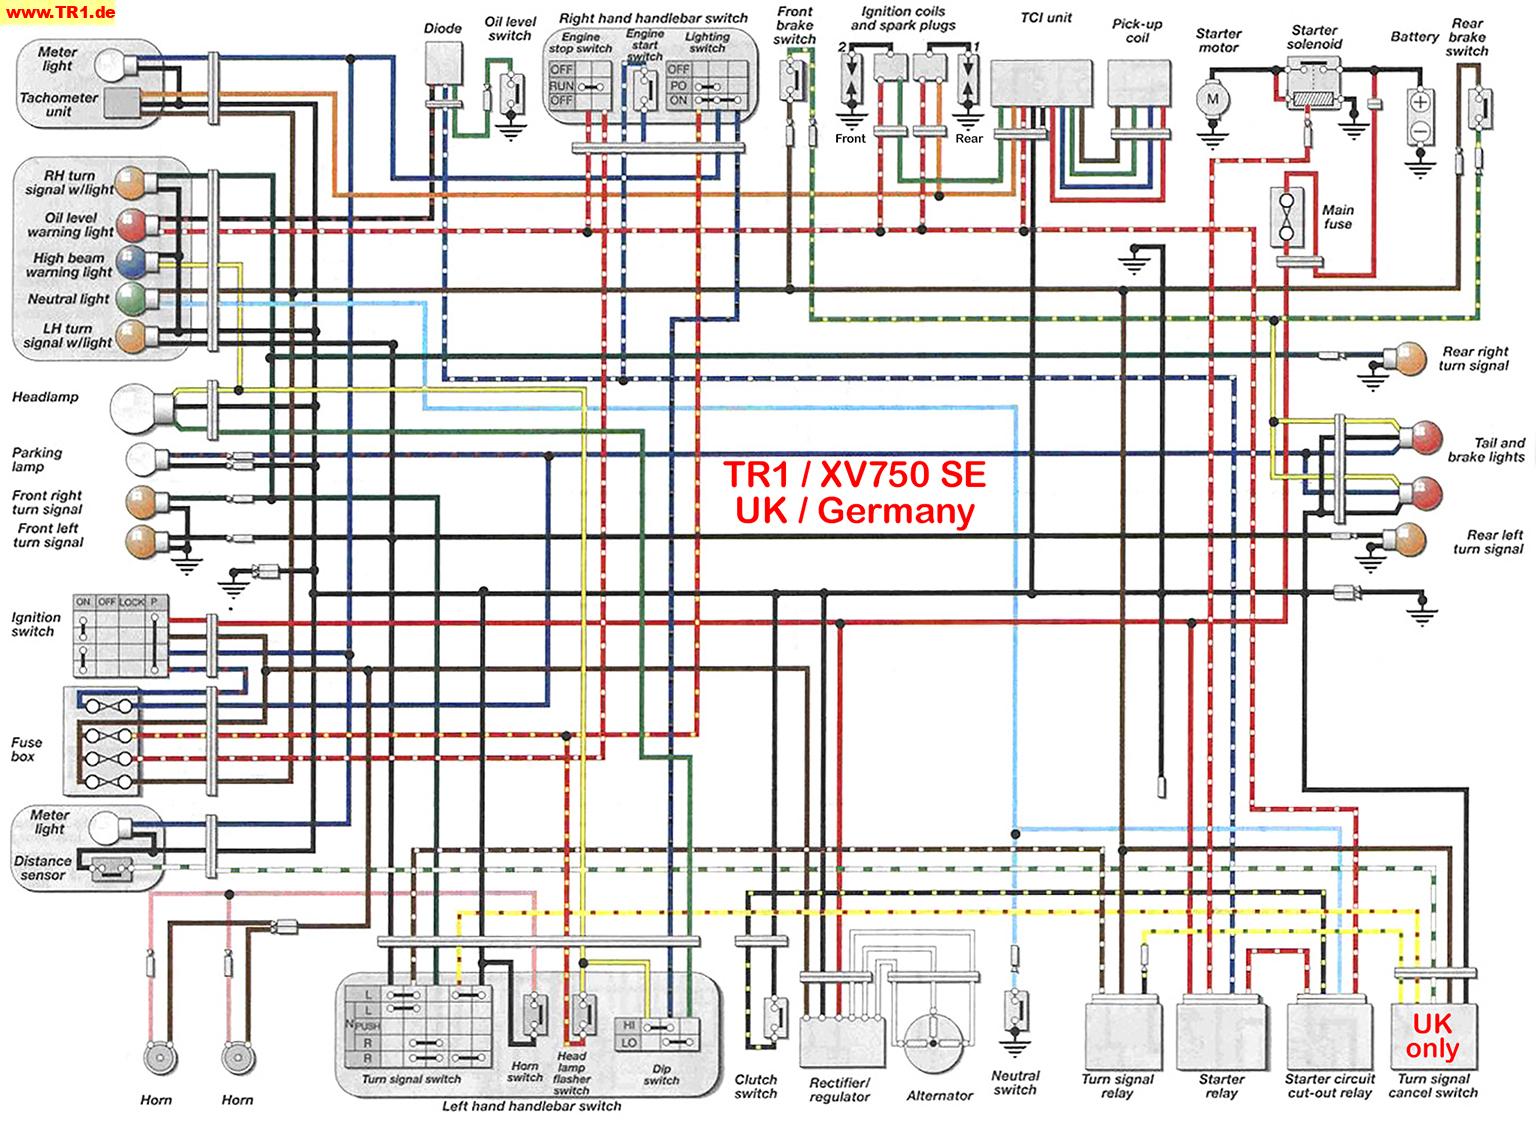 TR1/XV1000/XV920 wiring diagrams - Manfred's TR1. Page - All about YAMAHA  TR1. / XV1000 / XV920  1984 Yamaha Virago Wiring Diagram    Manfred's TR1. Page